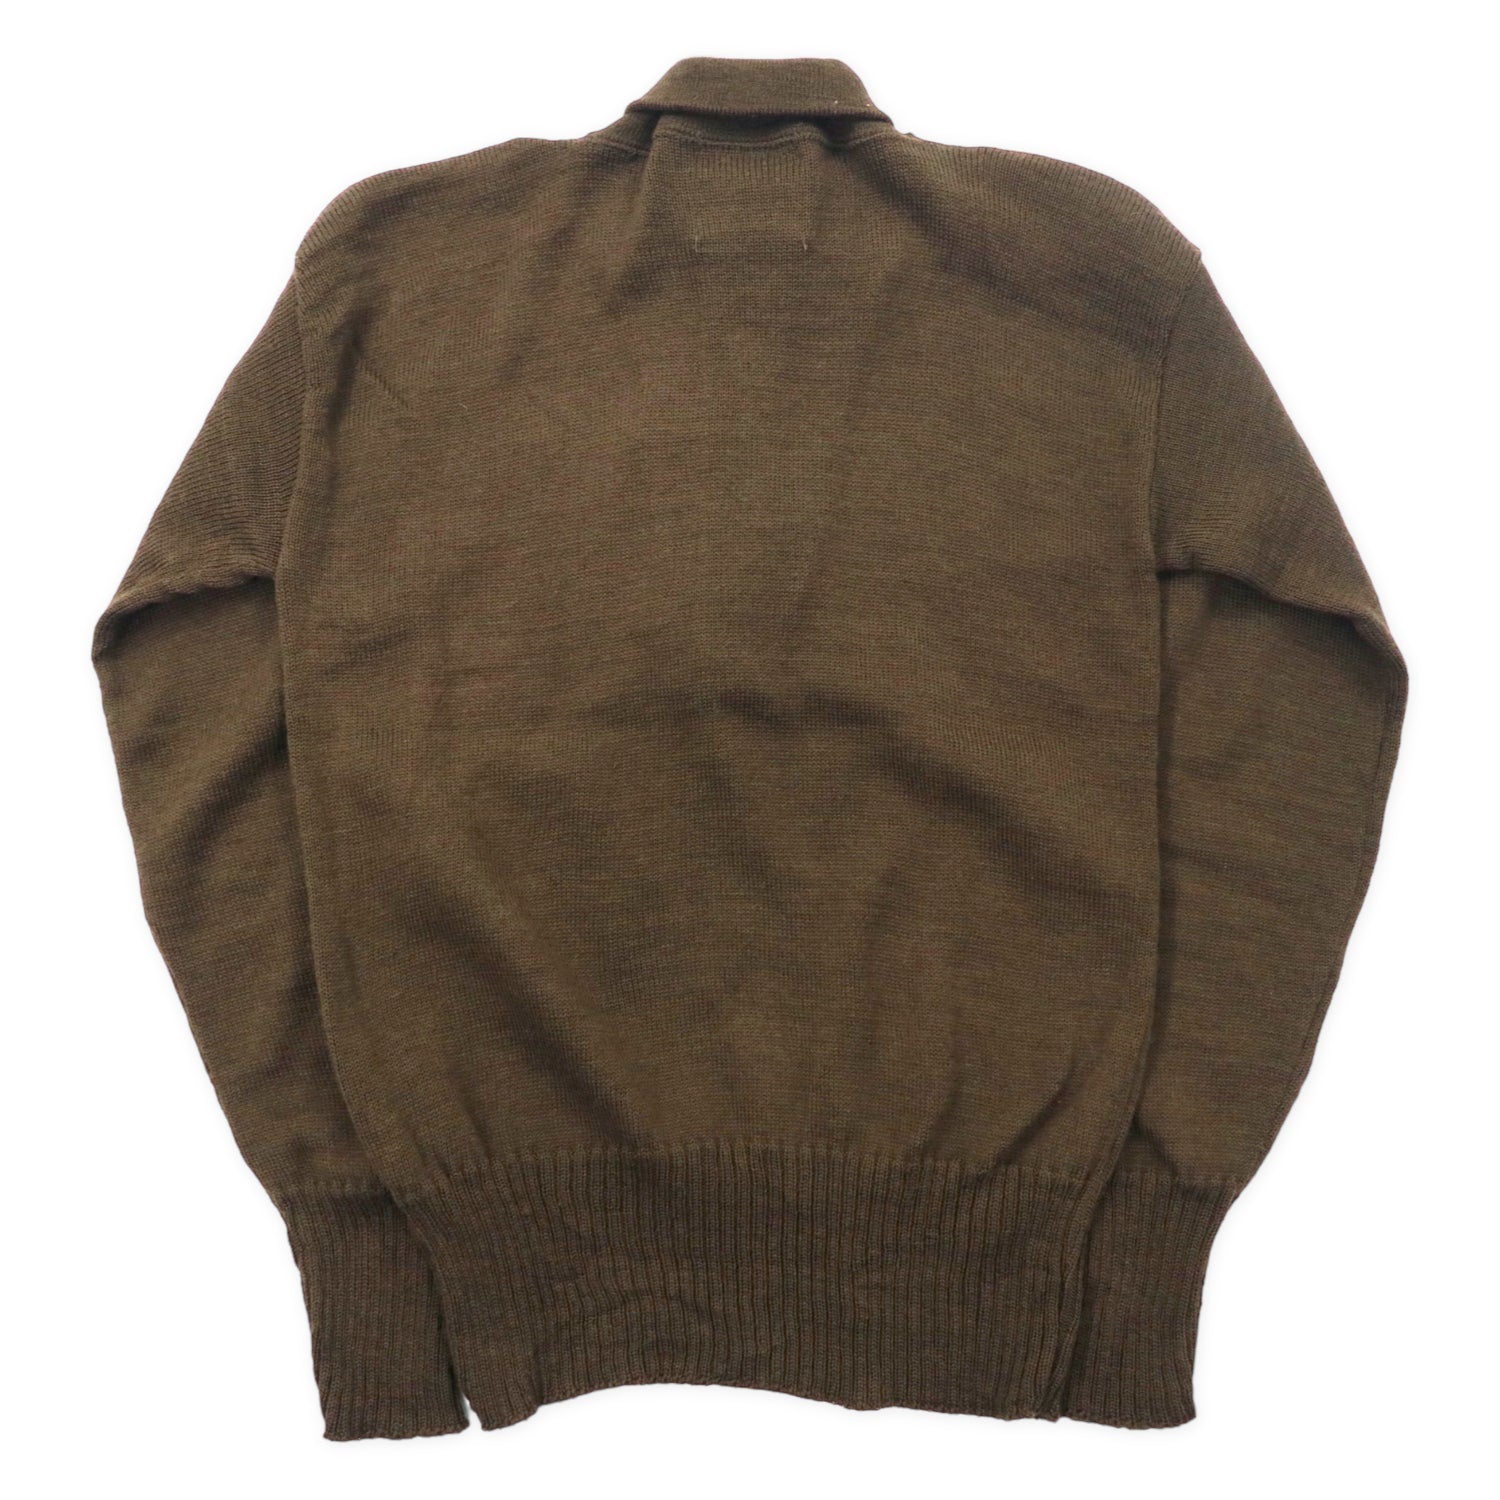 US ARMY 90's 5 button High-neck sweater Globic sweater knit M 